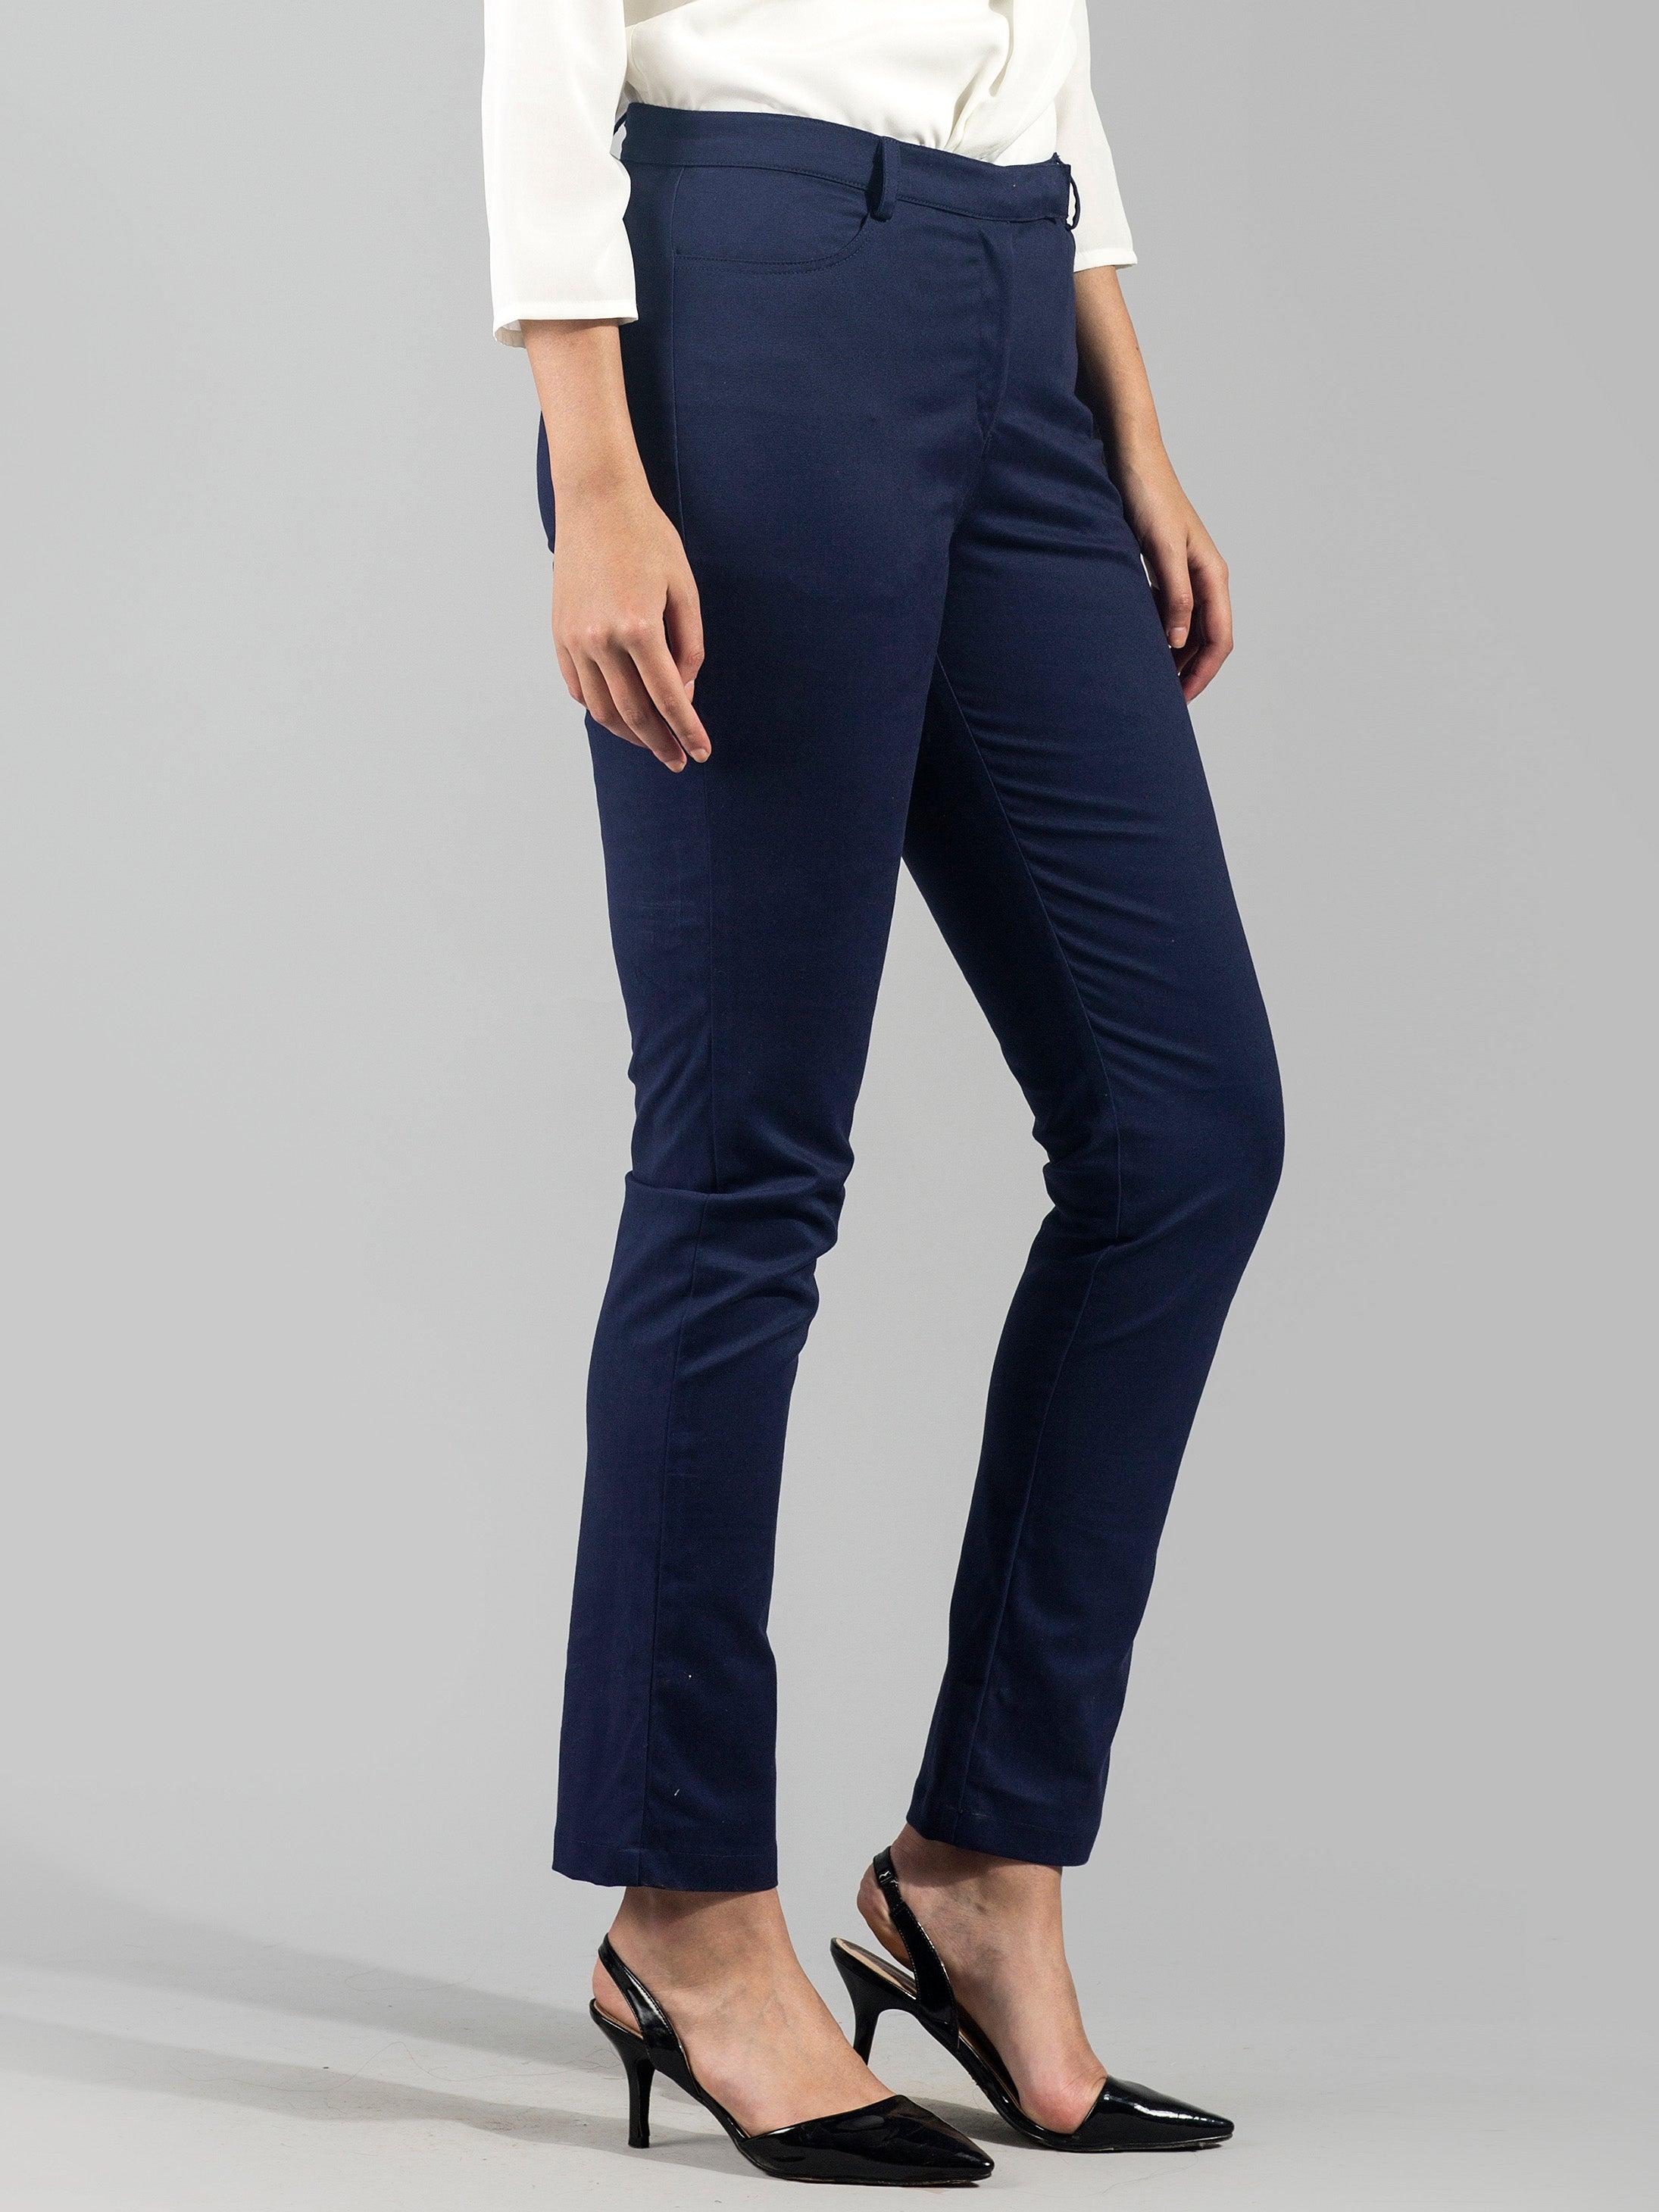 Essential Comfort Trousers - Navy| Formal Trousers